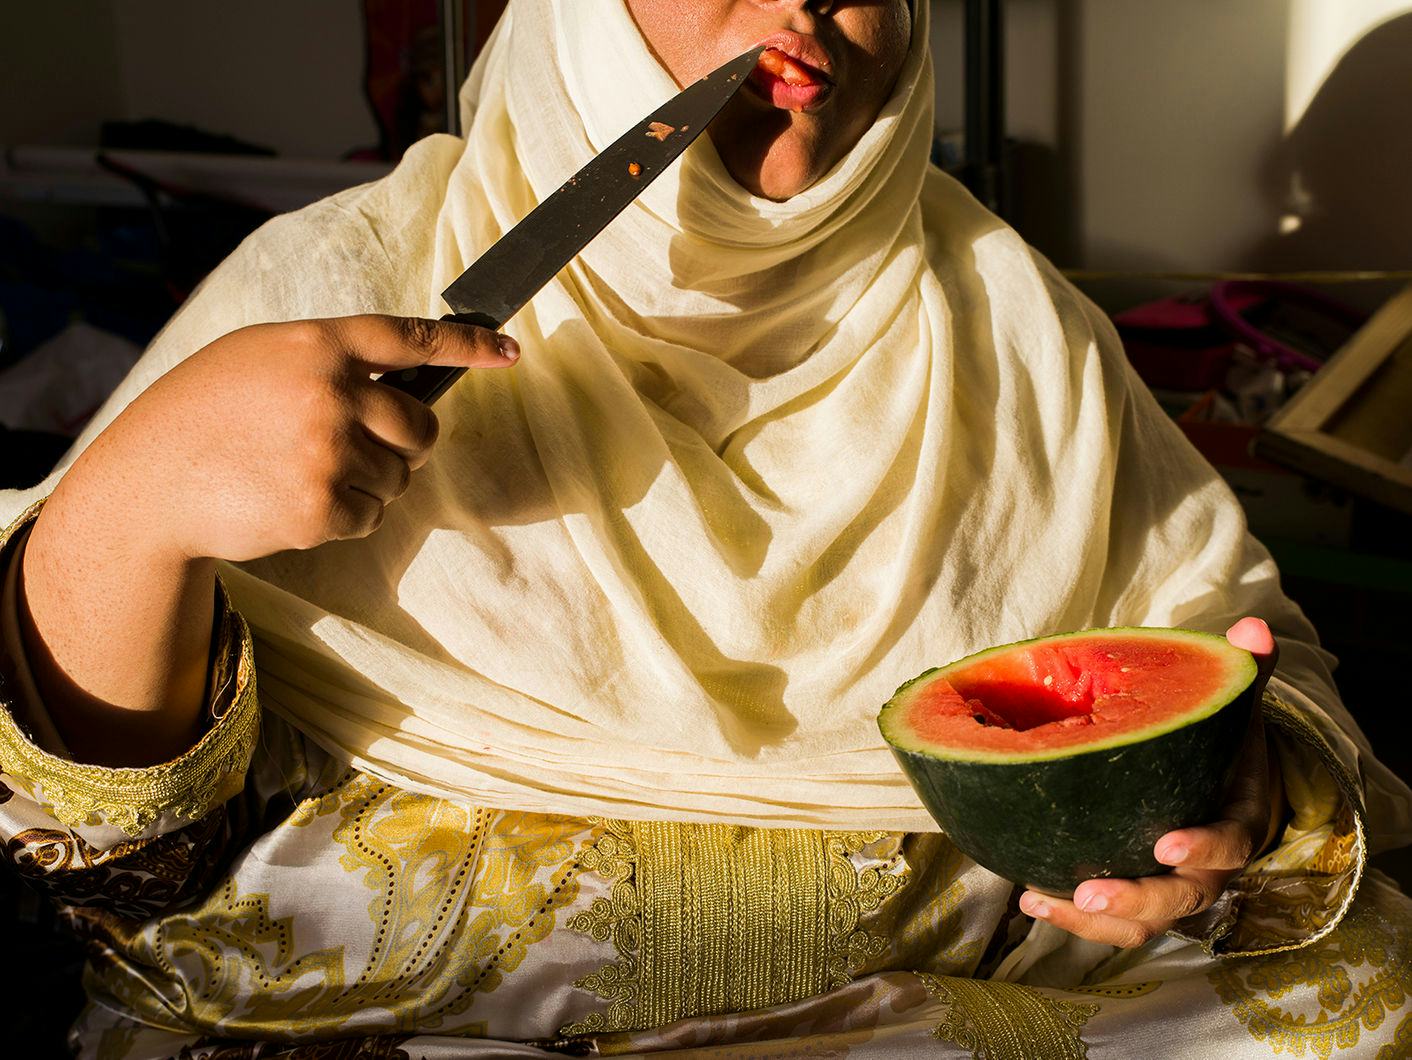 woman licking knife with watermelon in hand